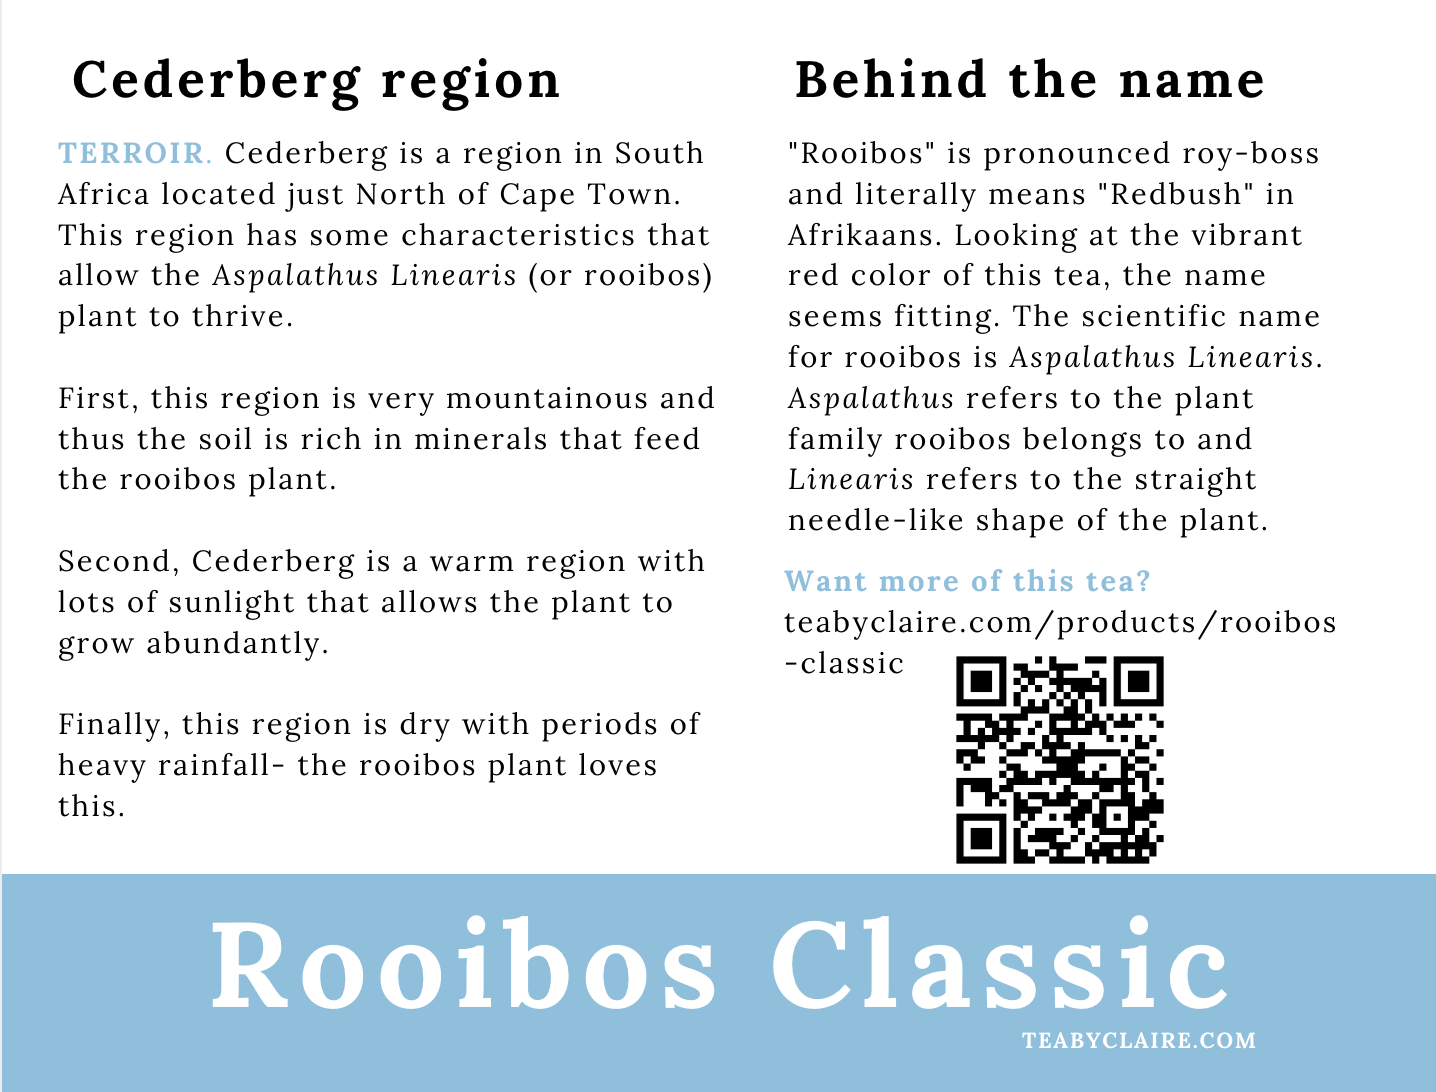 Rooibos Classic